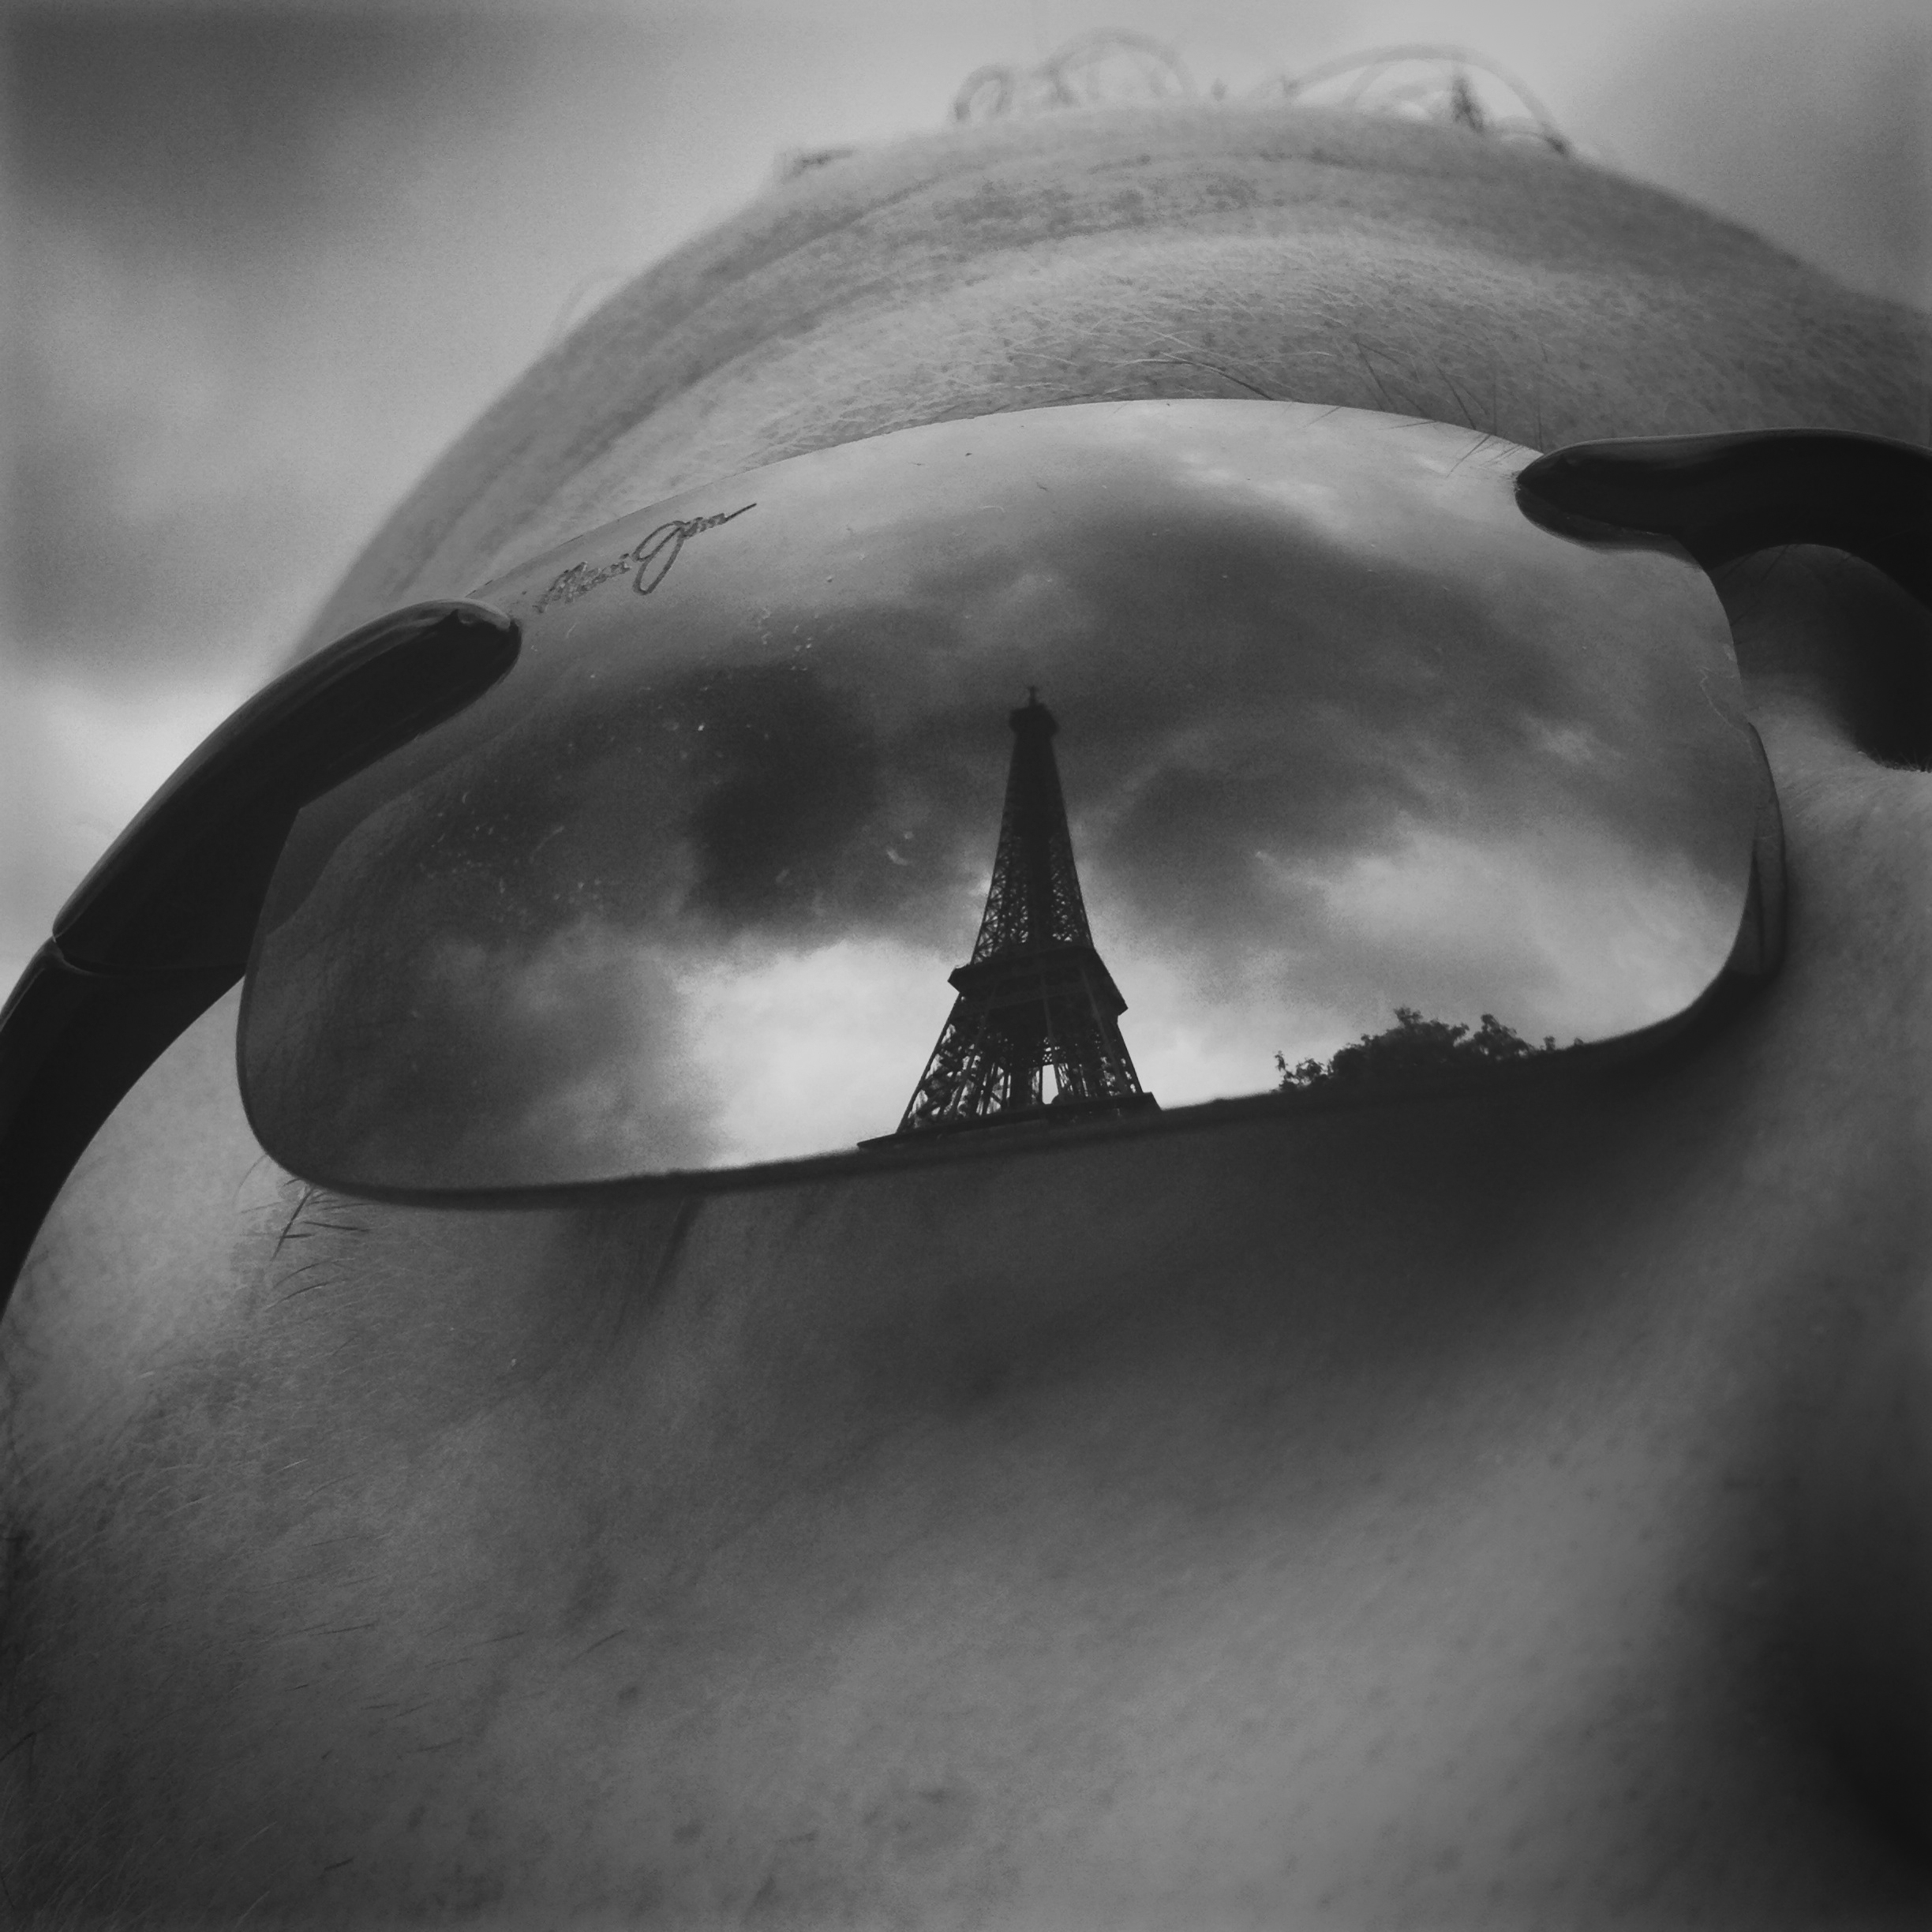 a person's face with sunglasses reflecting the eiffel tower